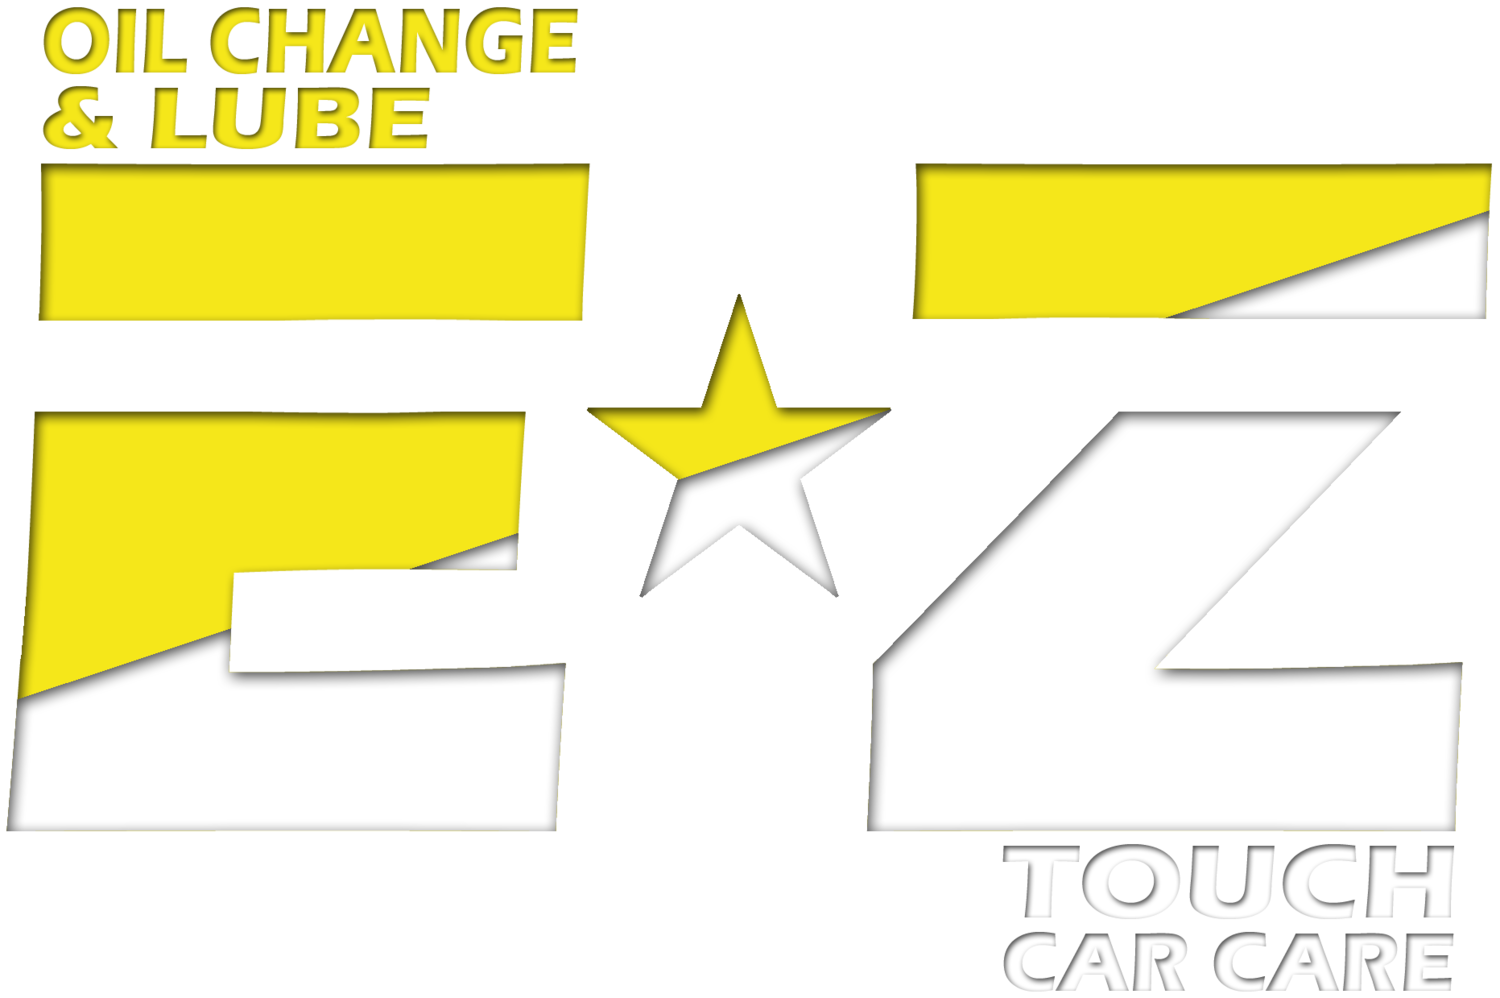 E-Z Oil Change and Touch Car Care